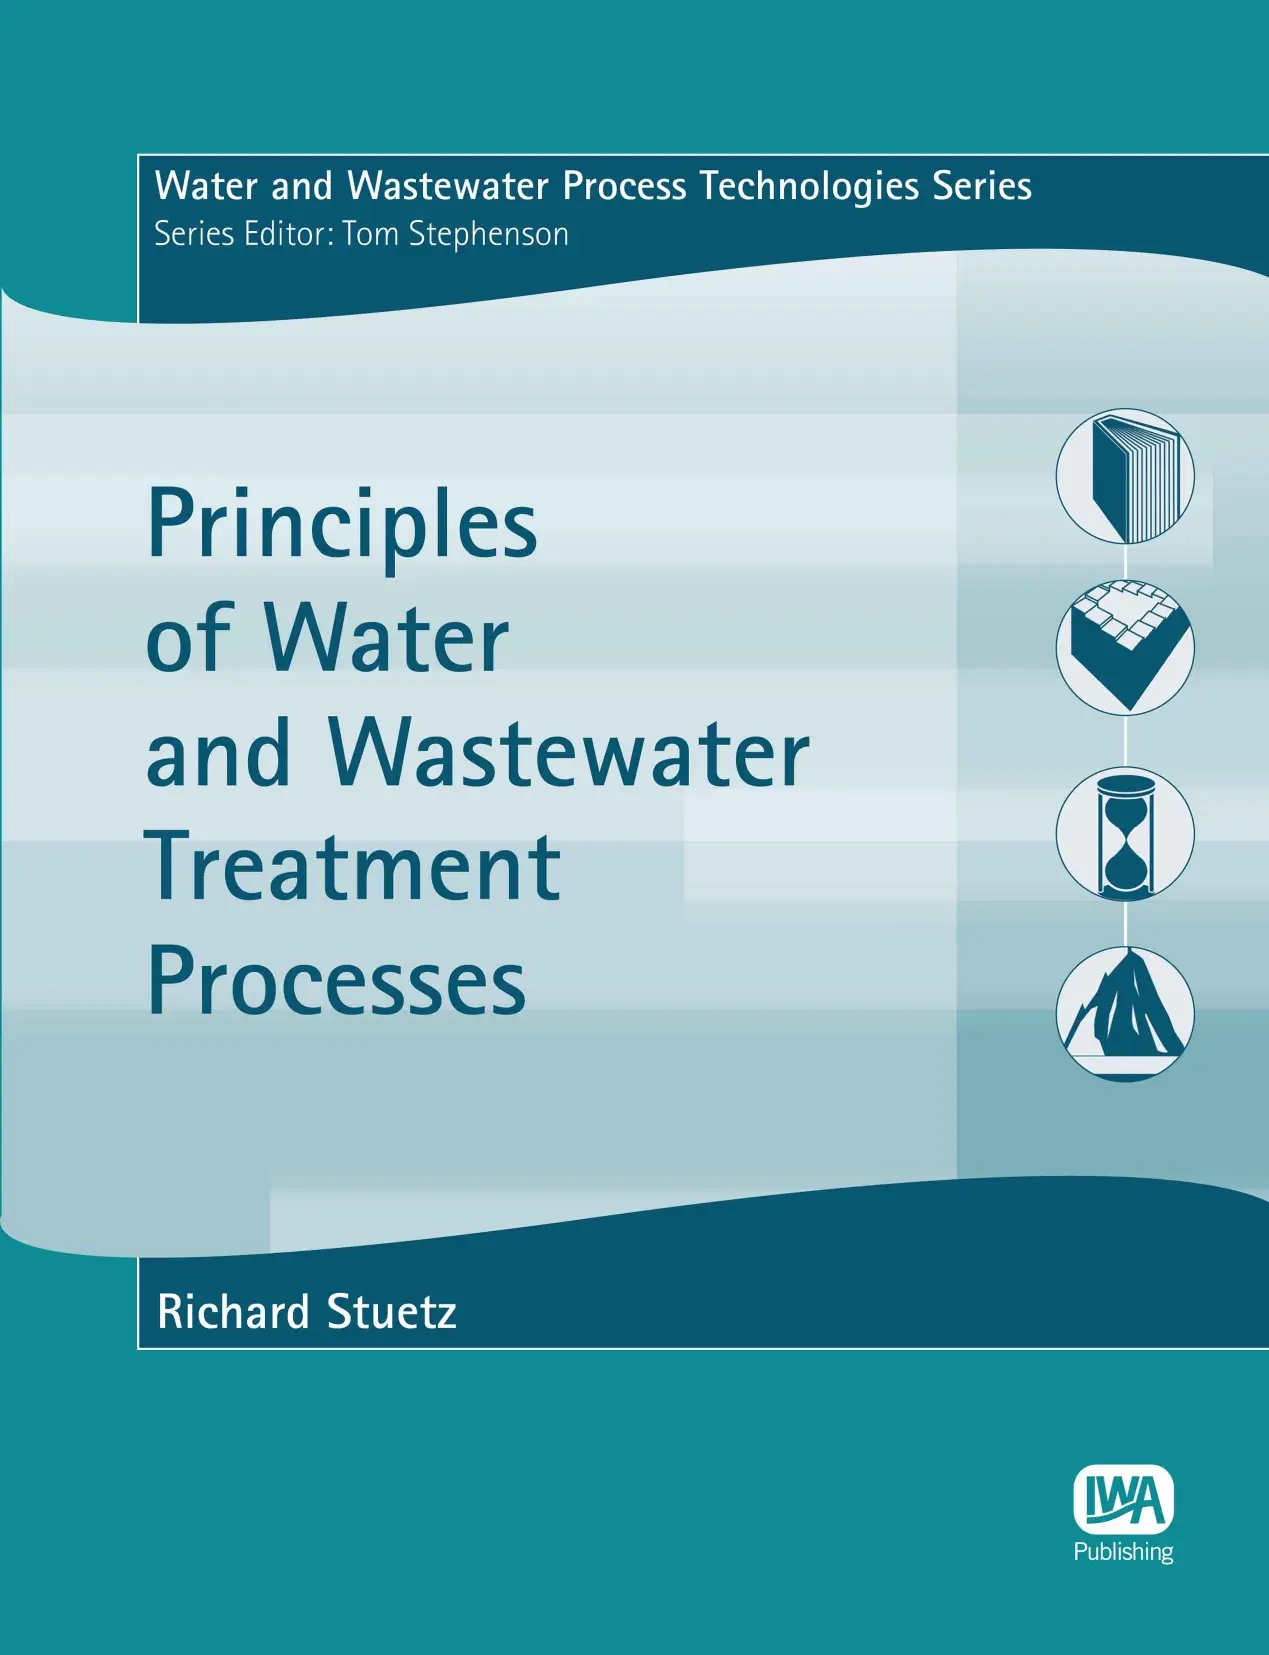 Principle of Water and Wastewater Treatment Processes